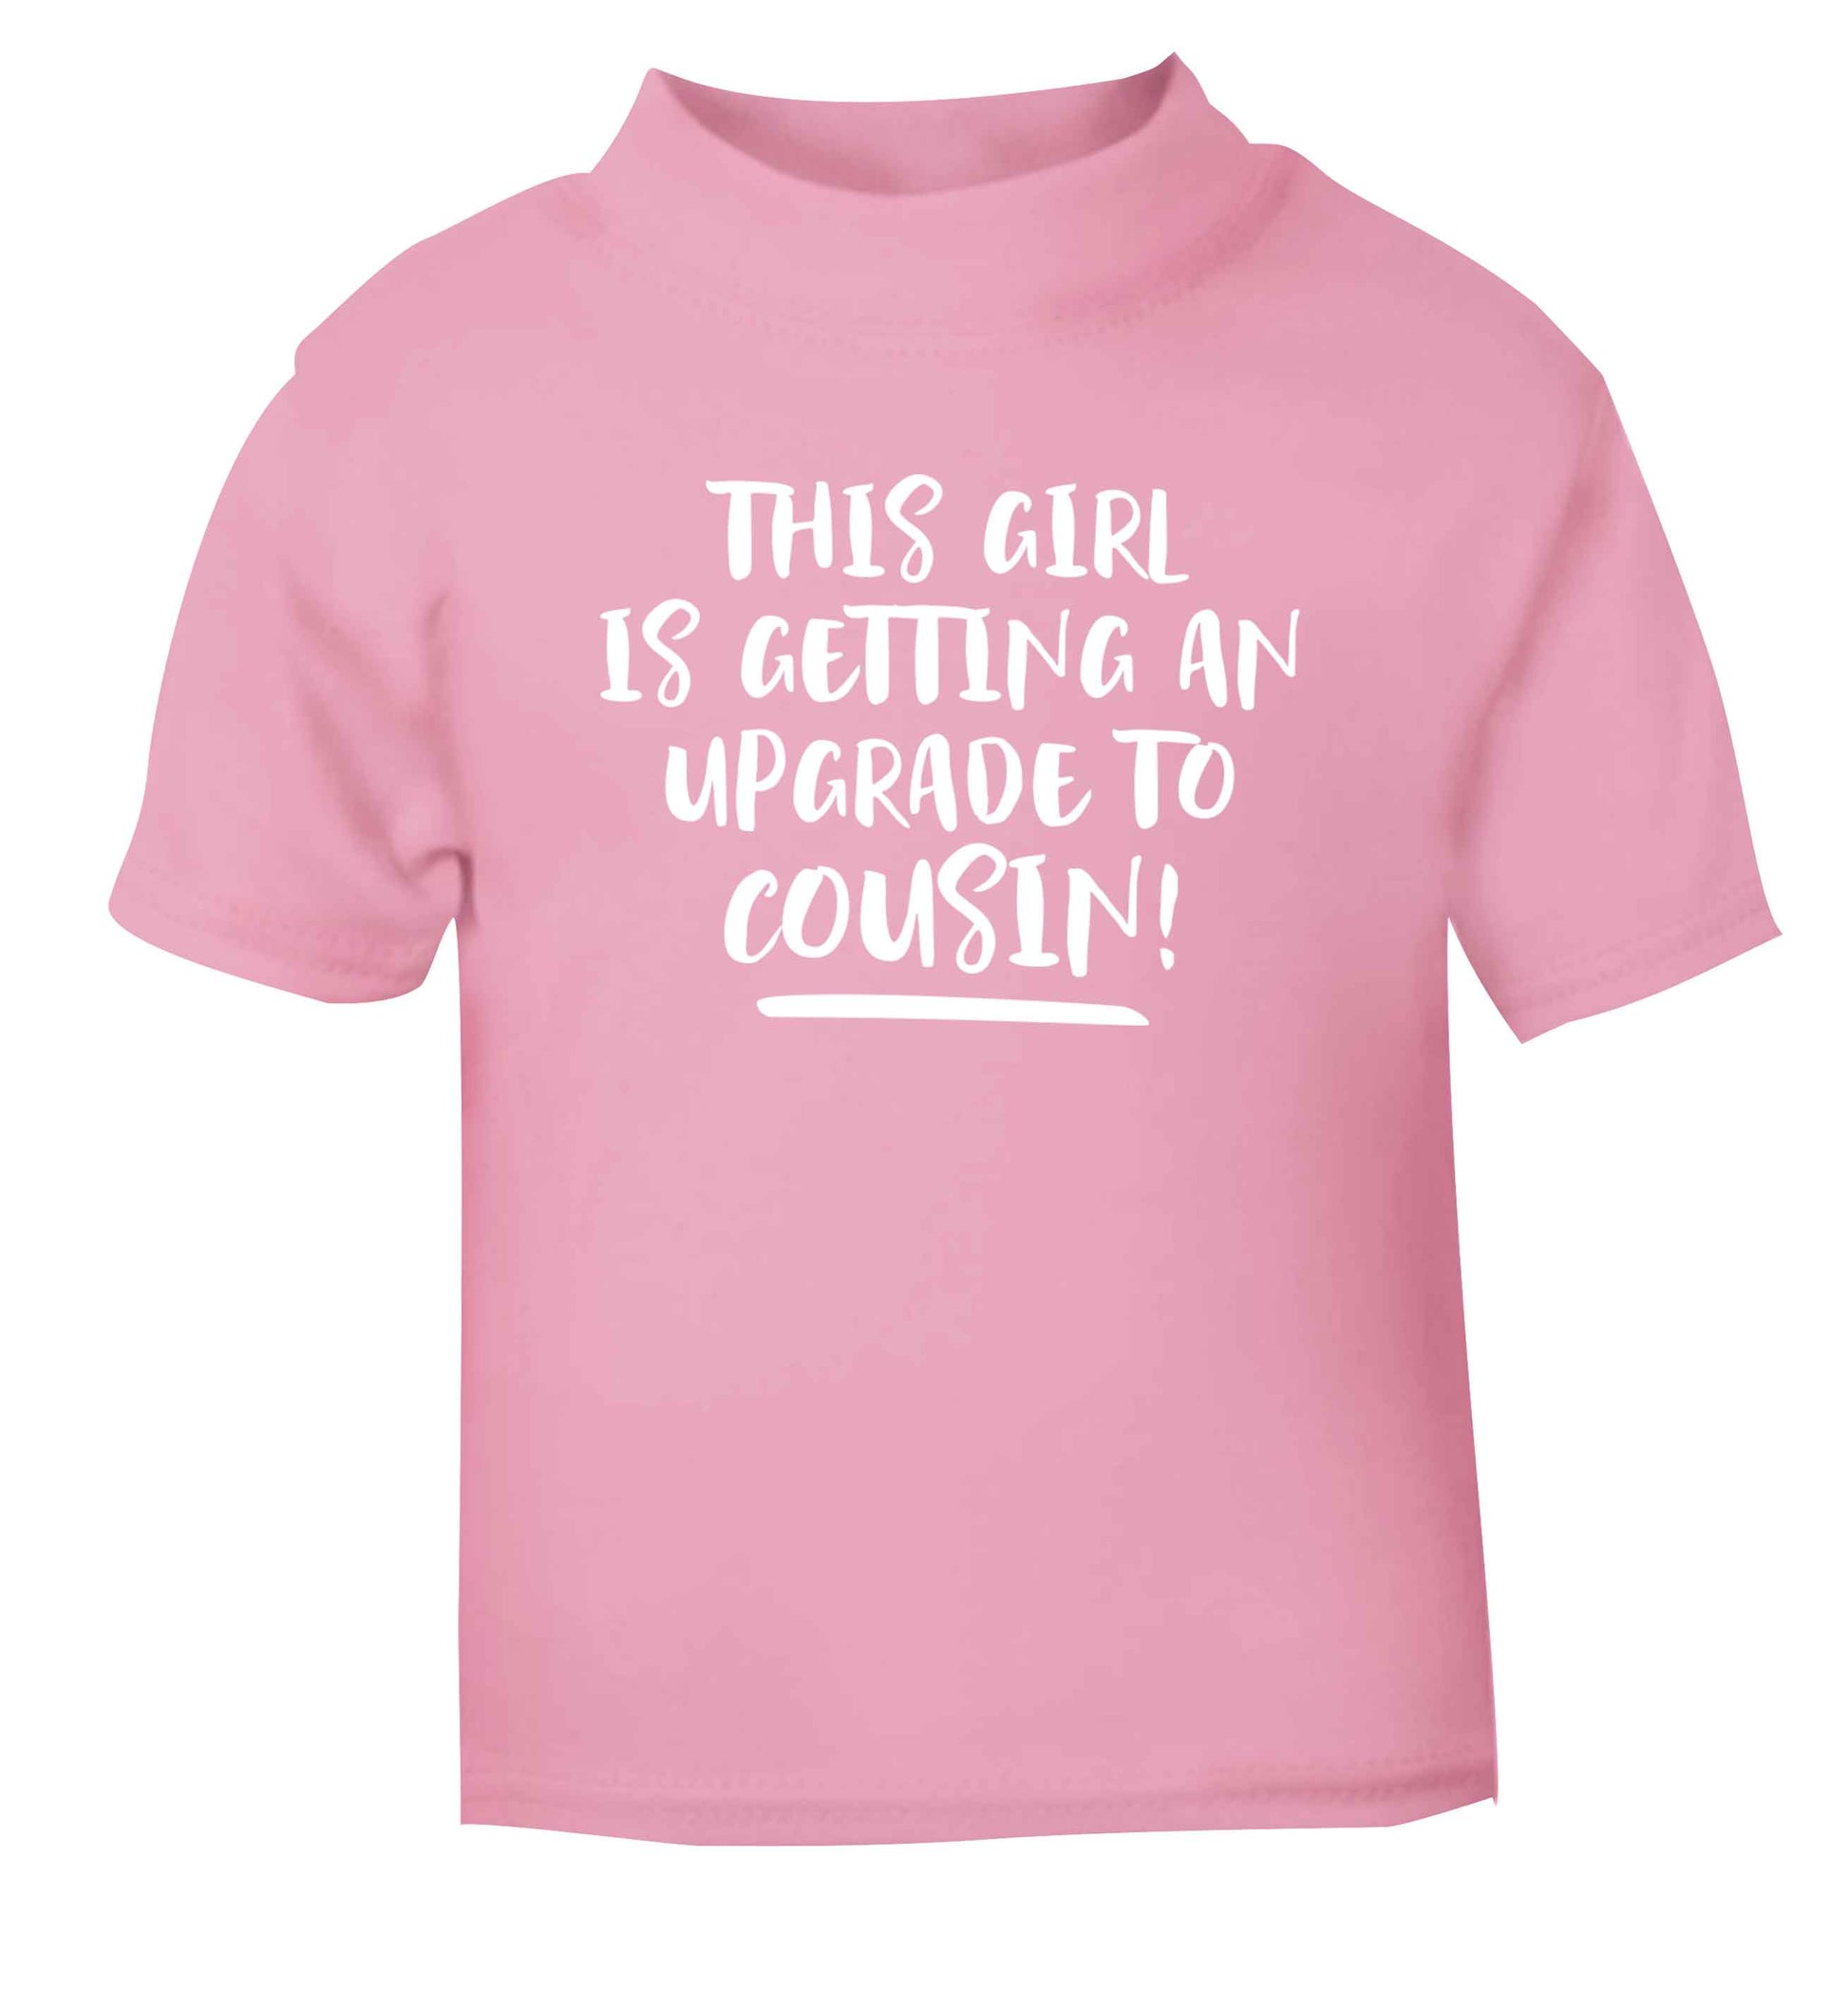 This girl is getting an upgrade to cousin! light pink Baby Toddler Tshirt 2 Years